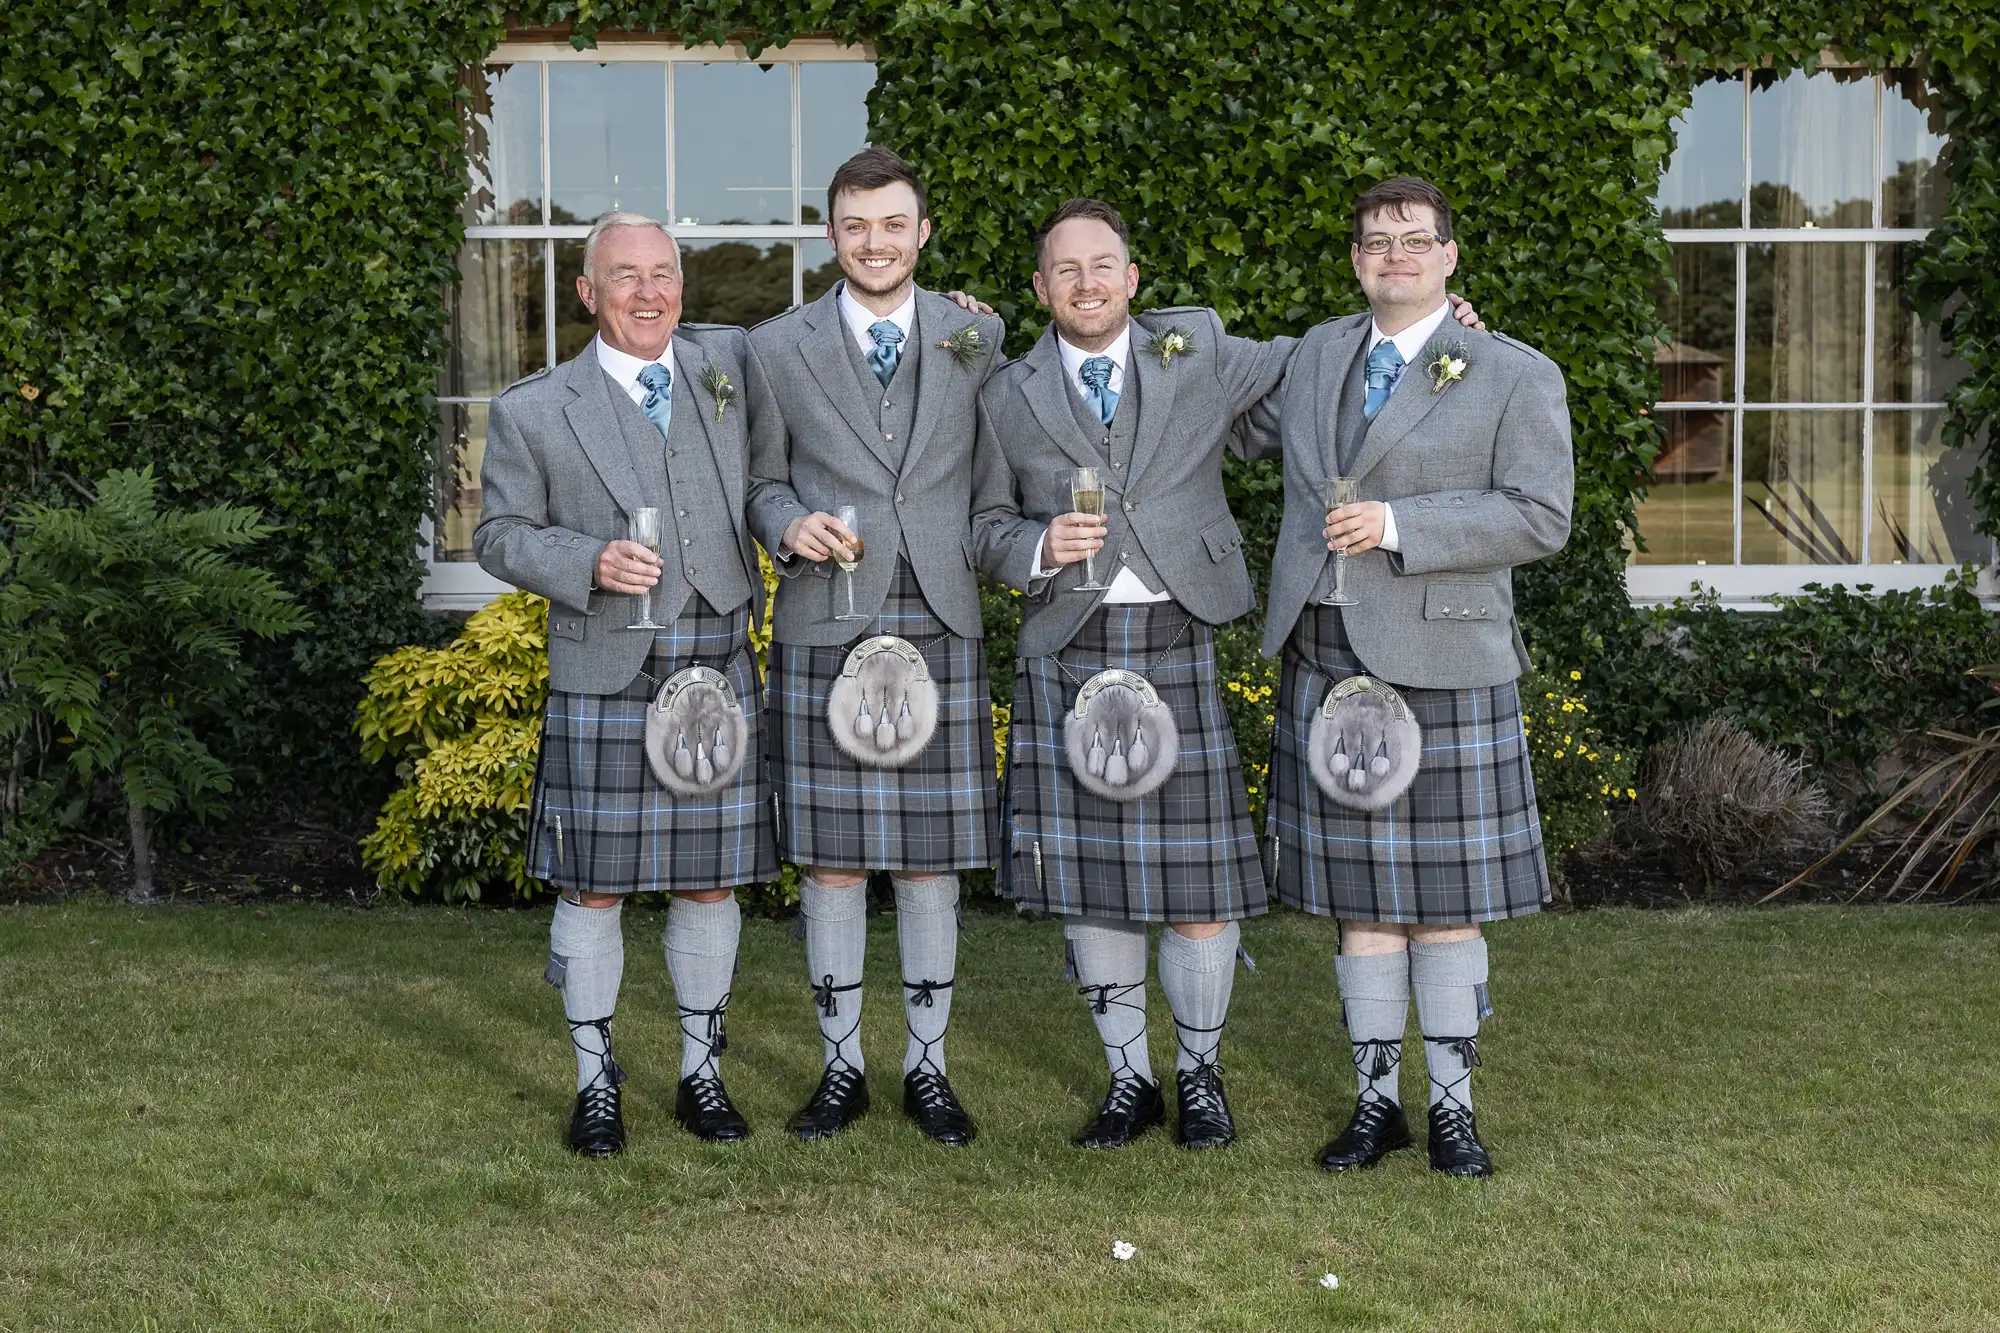 Four men in traditional tartan kilts and blazers, smiling and holding whisky glasses, standing on a lawn with a hedge backdrop.